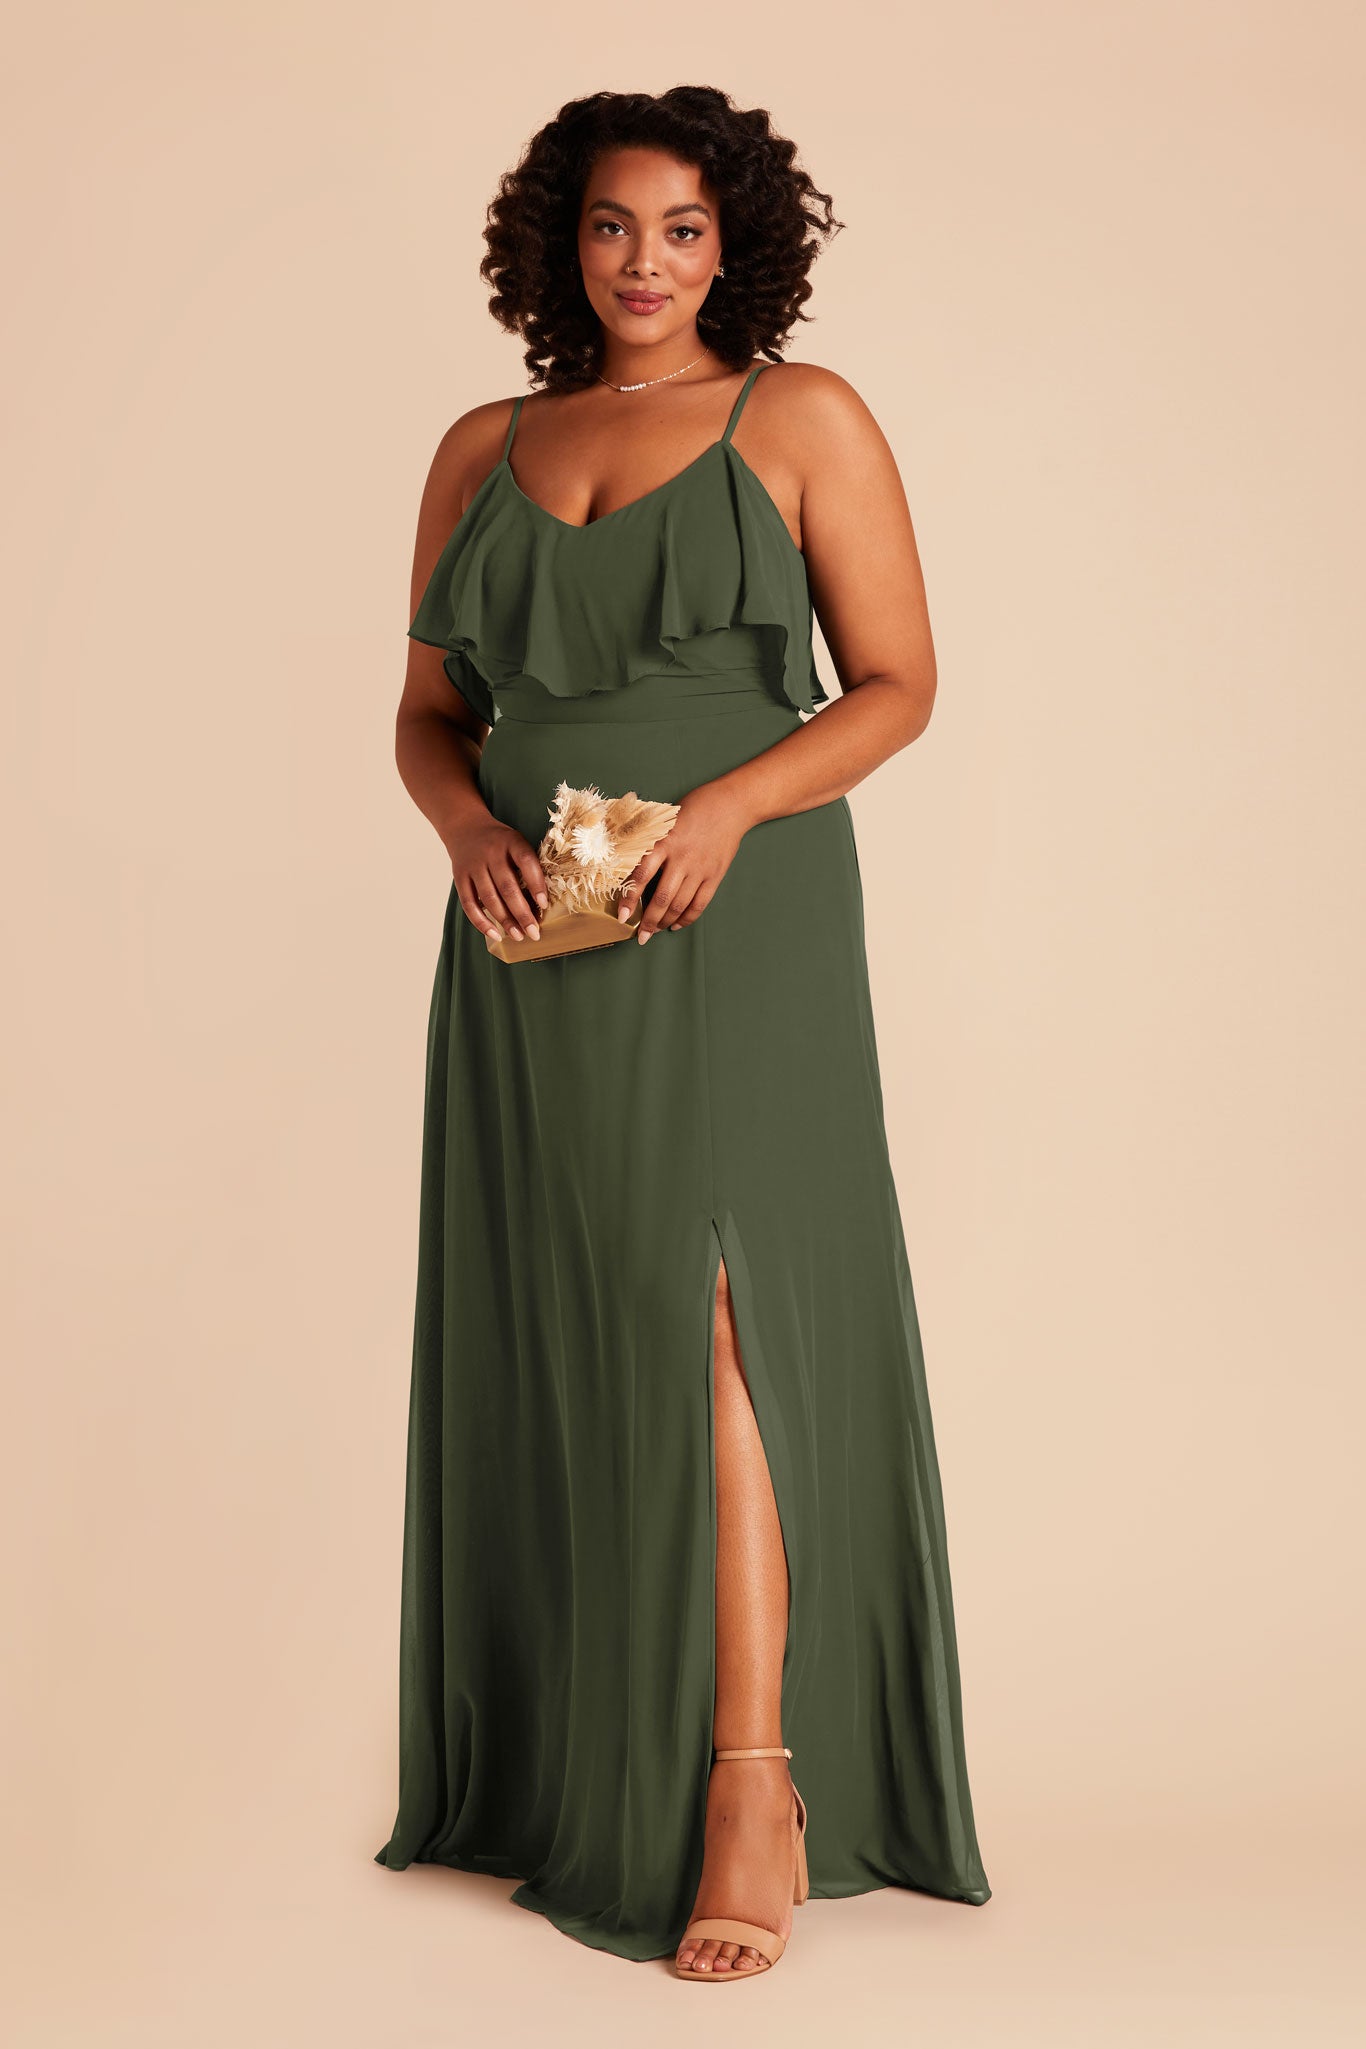 Olive Jane Convertible Dress by Birdy Grey